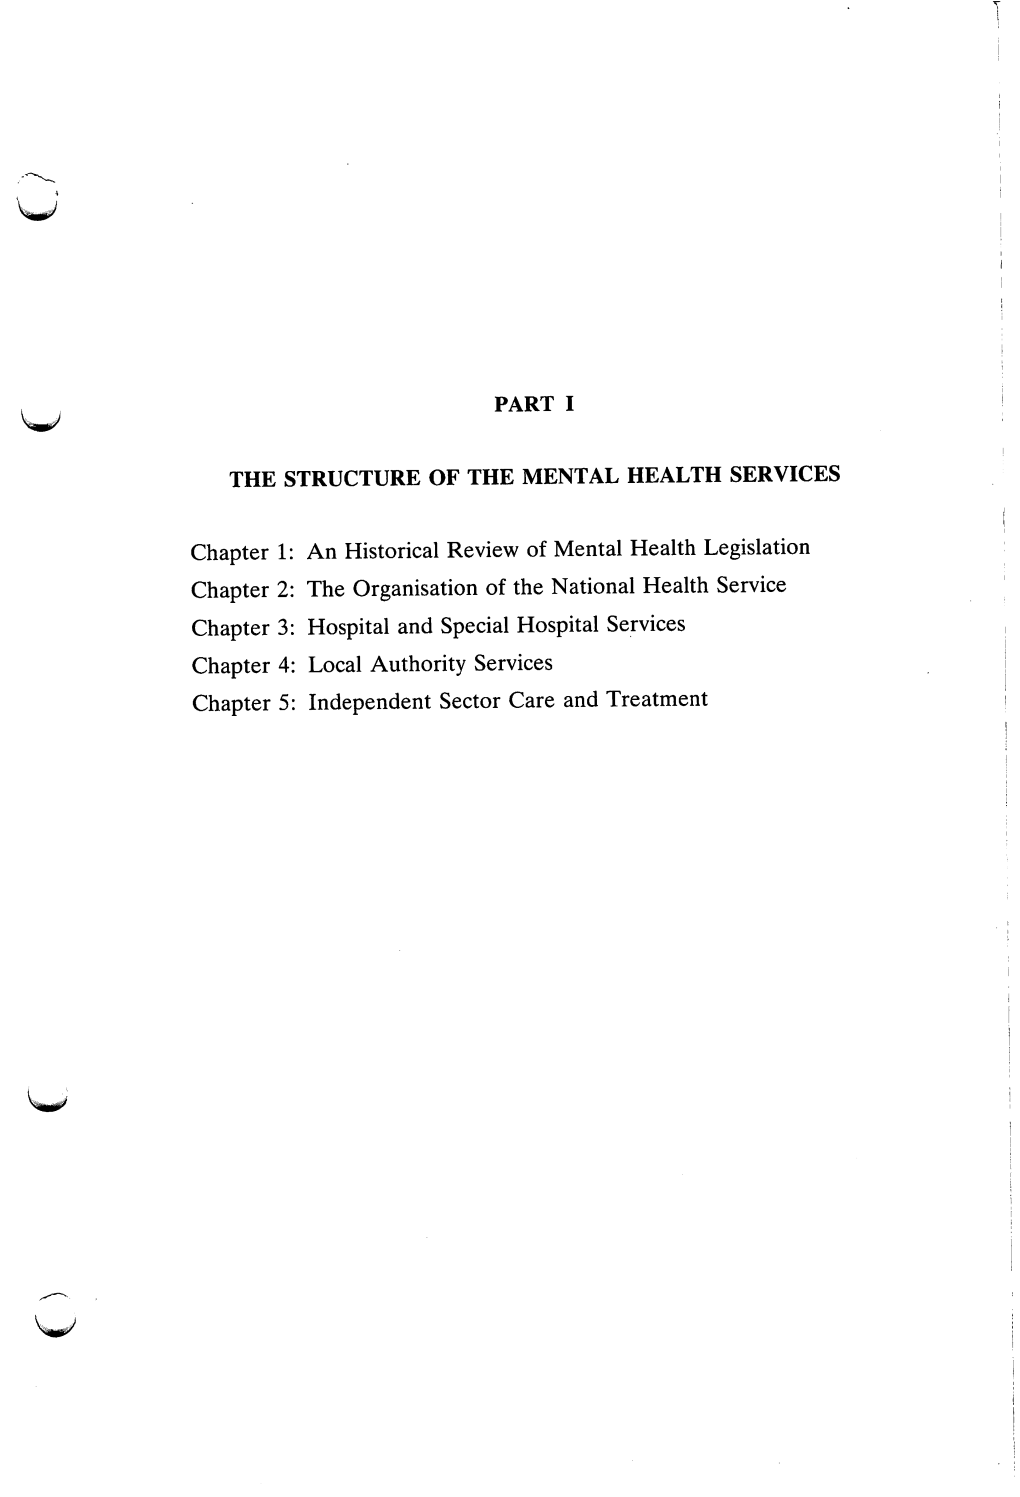 An Historical Review of Mental Health Legislation Chapter 2